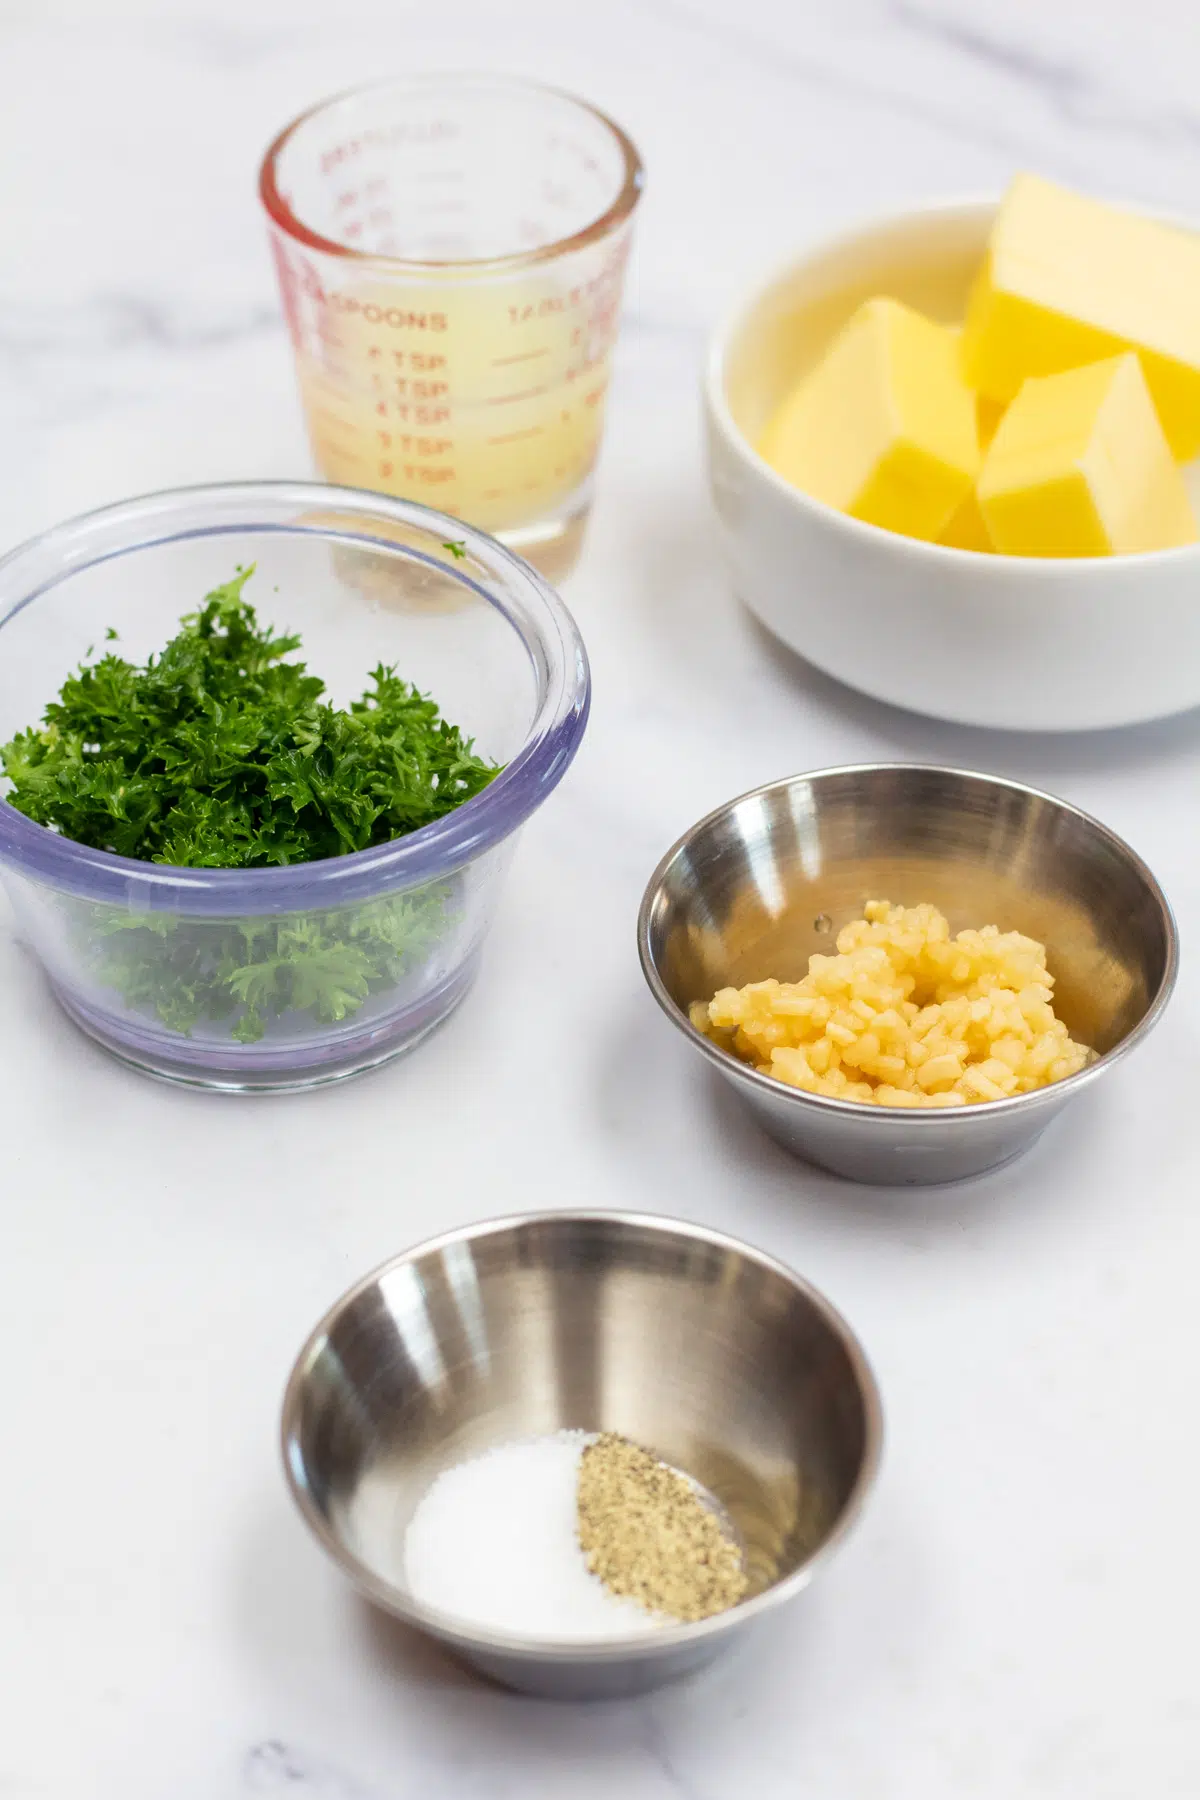 Tall image showing ingredients needed for lemon butter sauce.